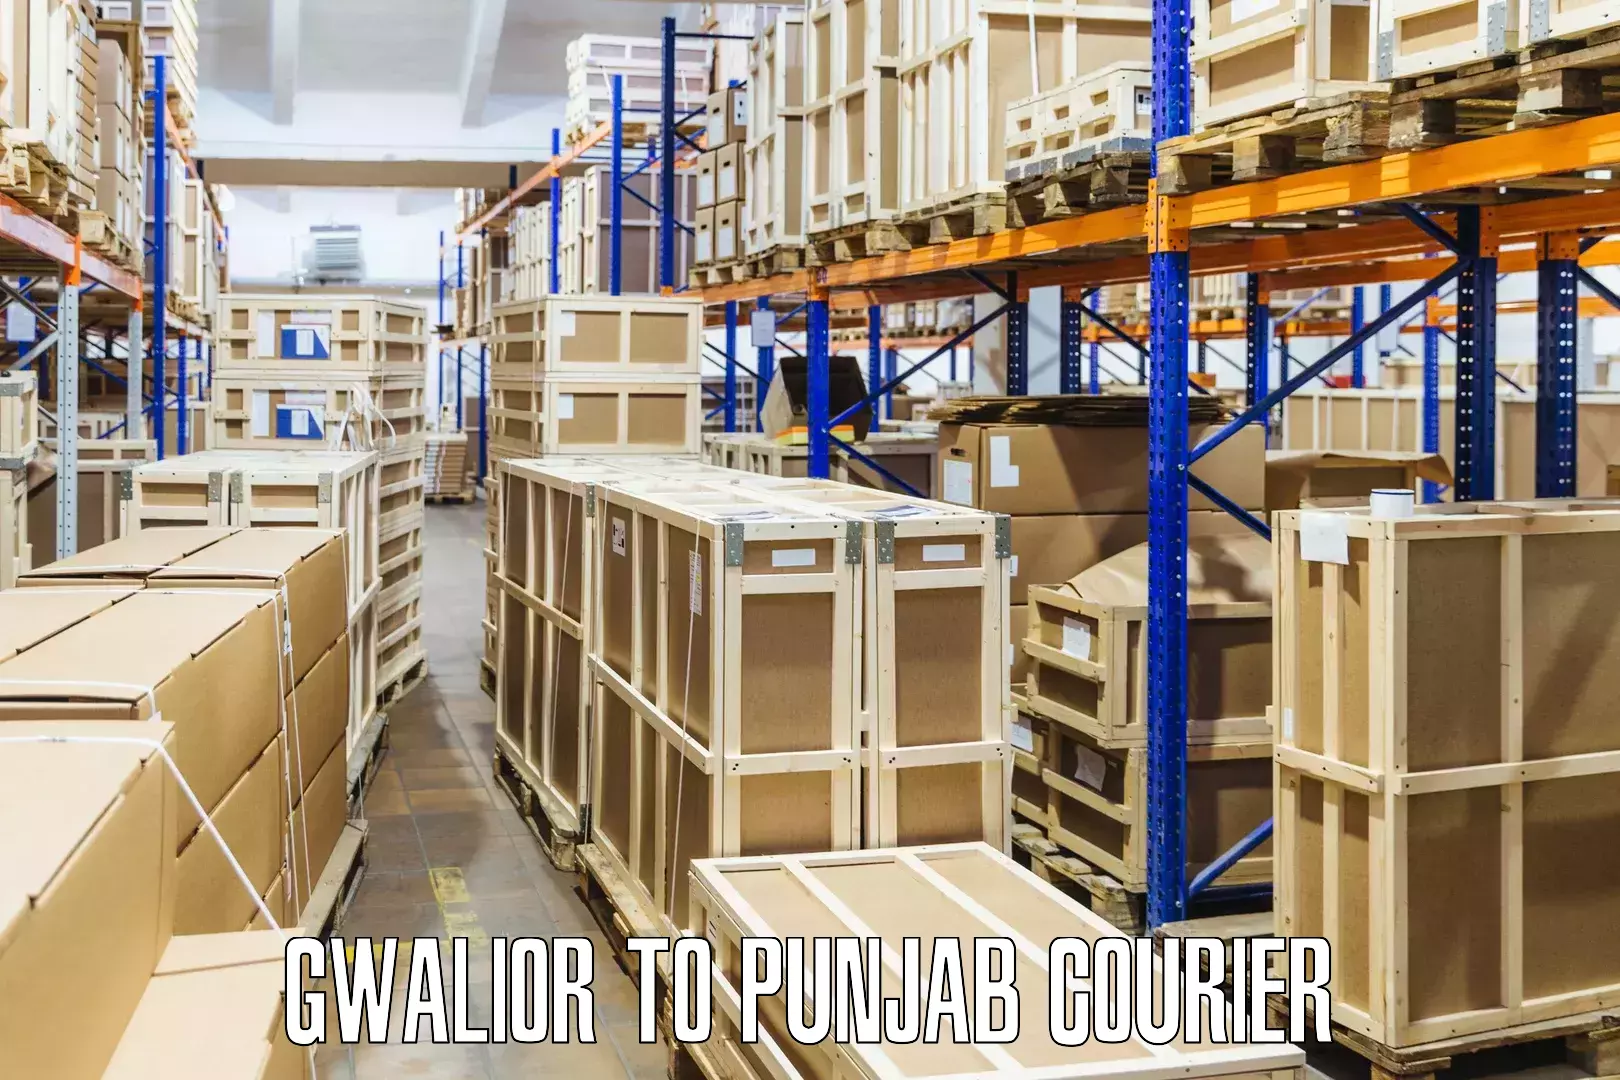 Courier app Gwalior to Punjab